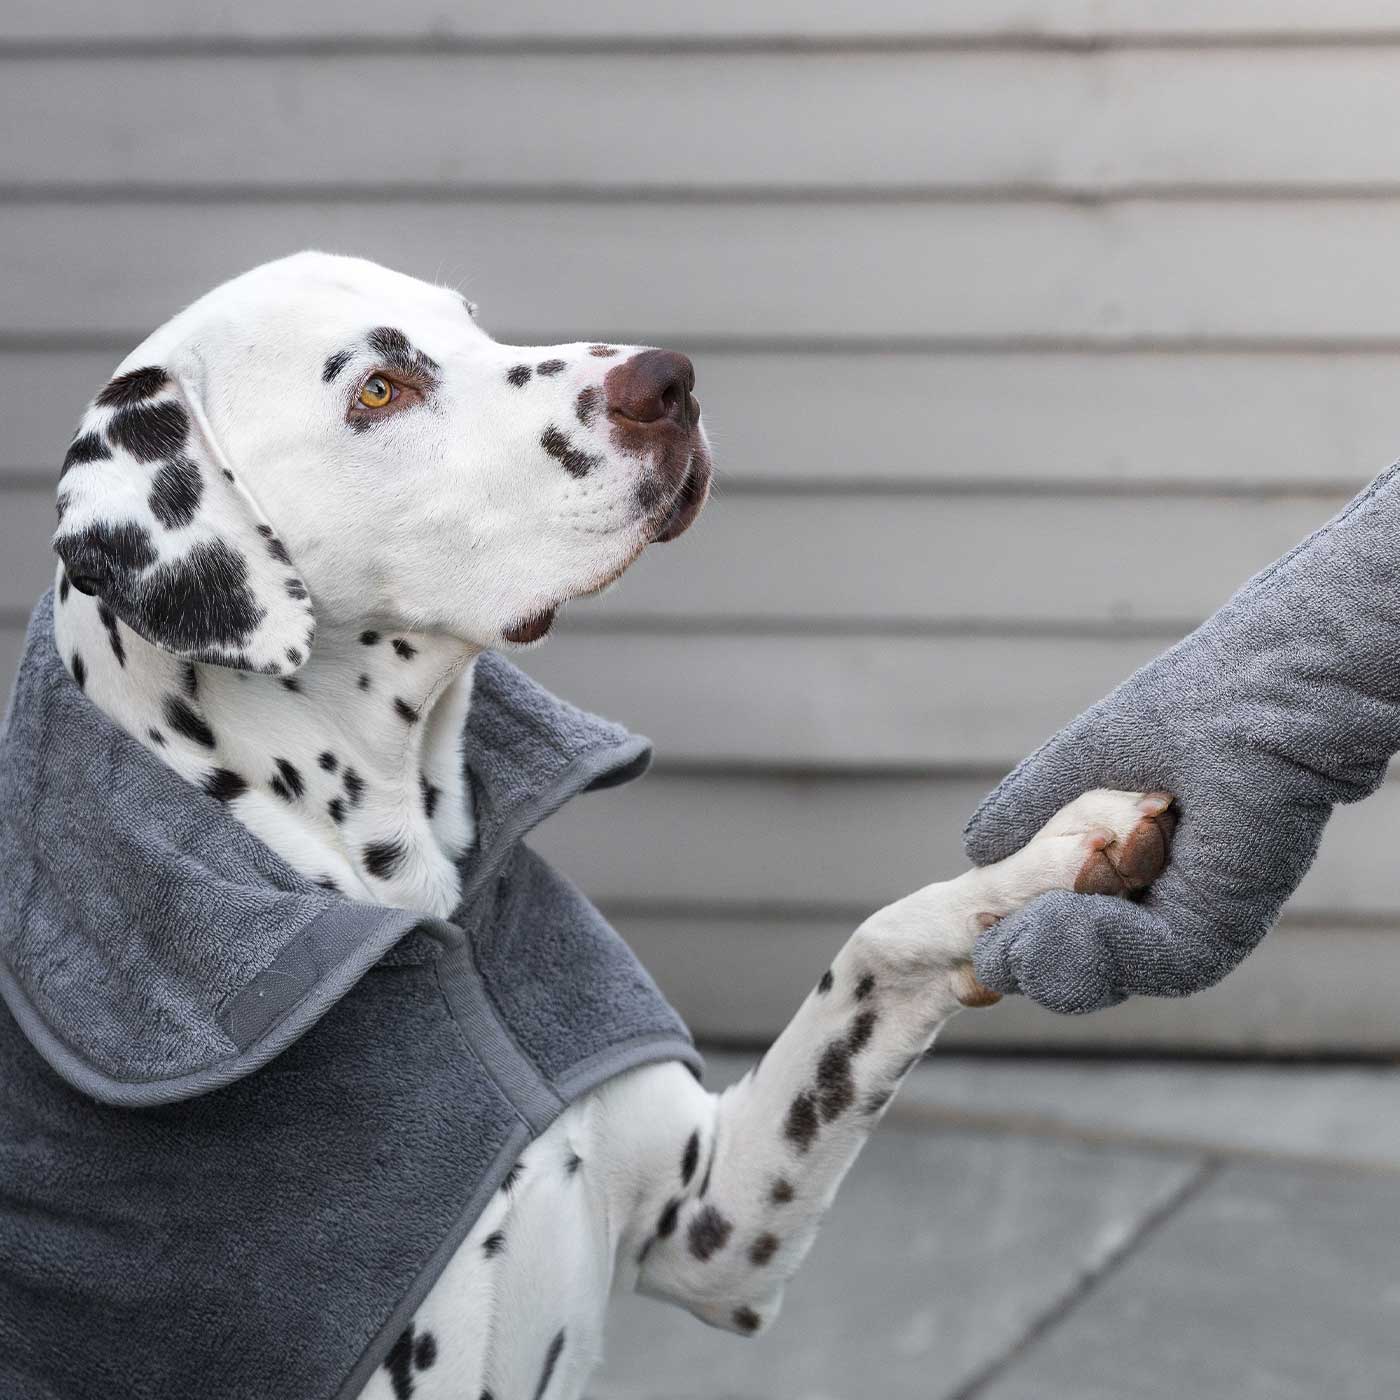 Introducing the ultimate bamboo dog drying mitts in beautiful grey Gun Metal, made from luxurious bamboo to aid sensitive skin featuring universal size to fit all with super absorbent material for easy pet drying! The perfect dog drying gloves, available now at Lords & Labradors US, In four colors!